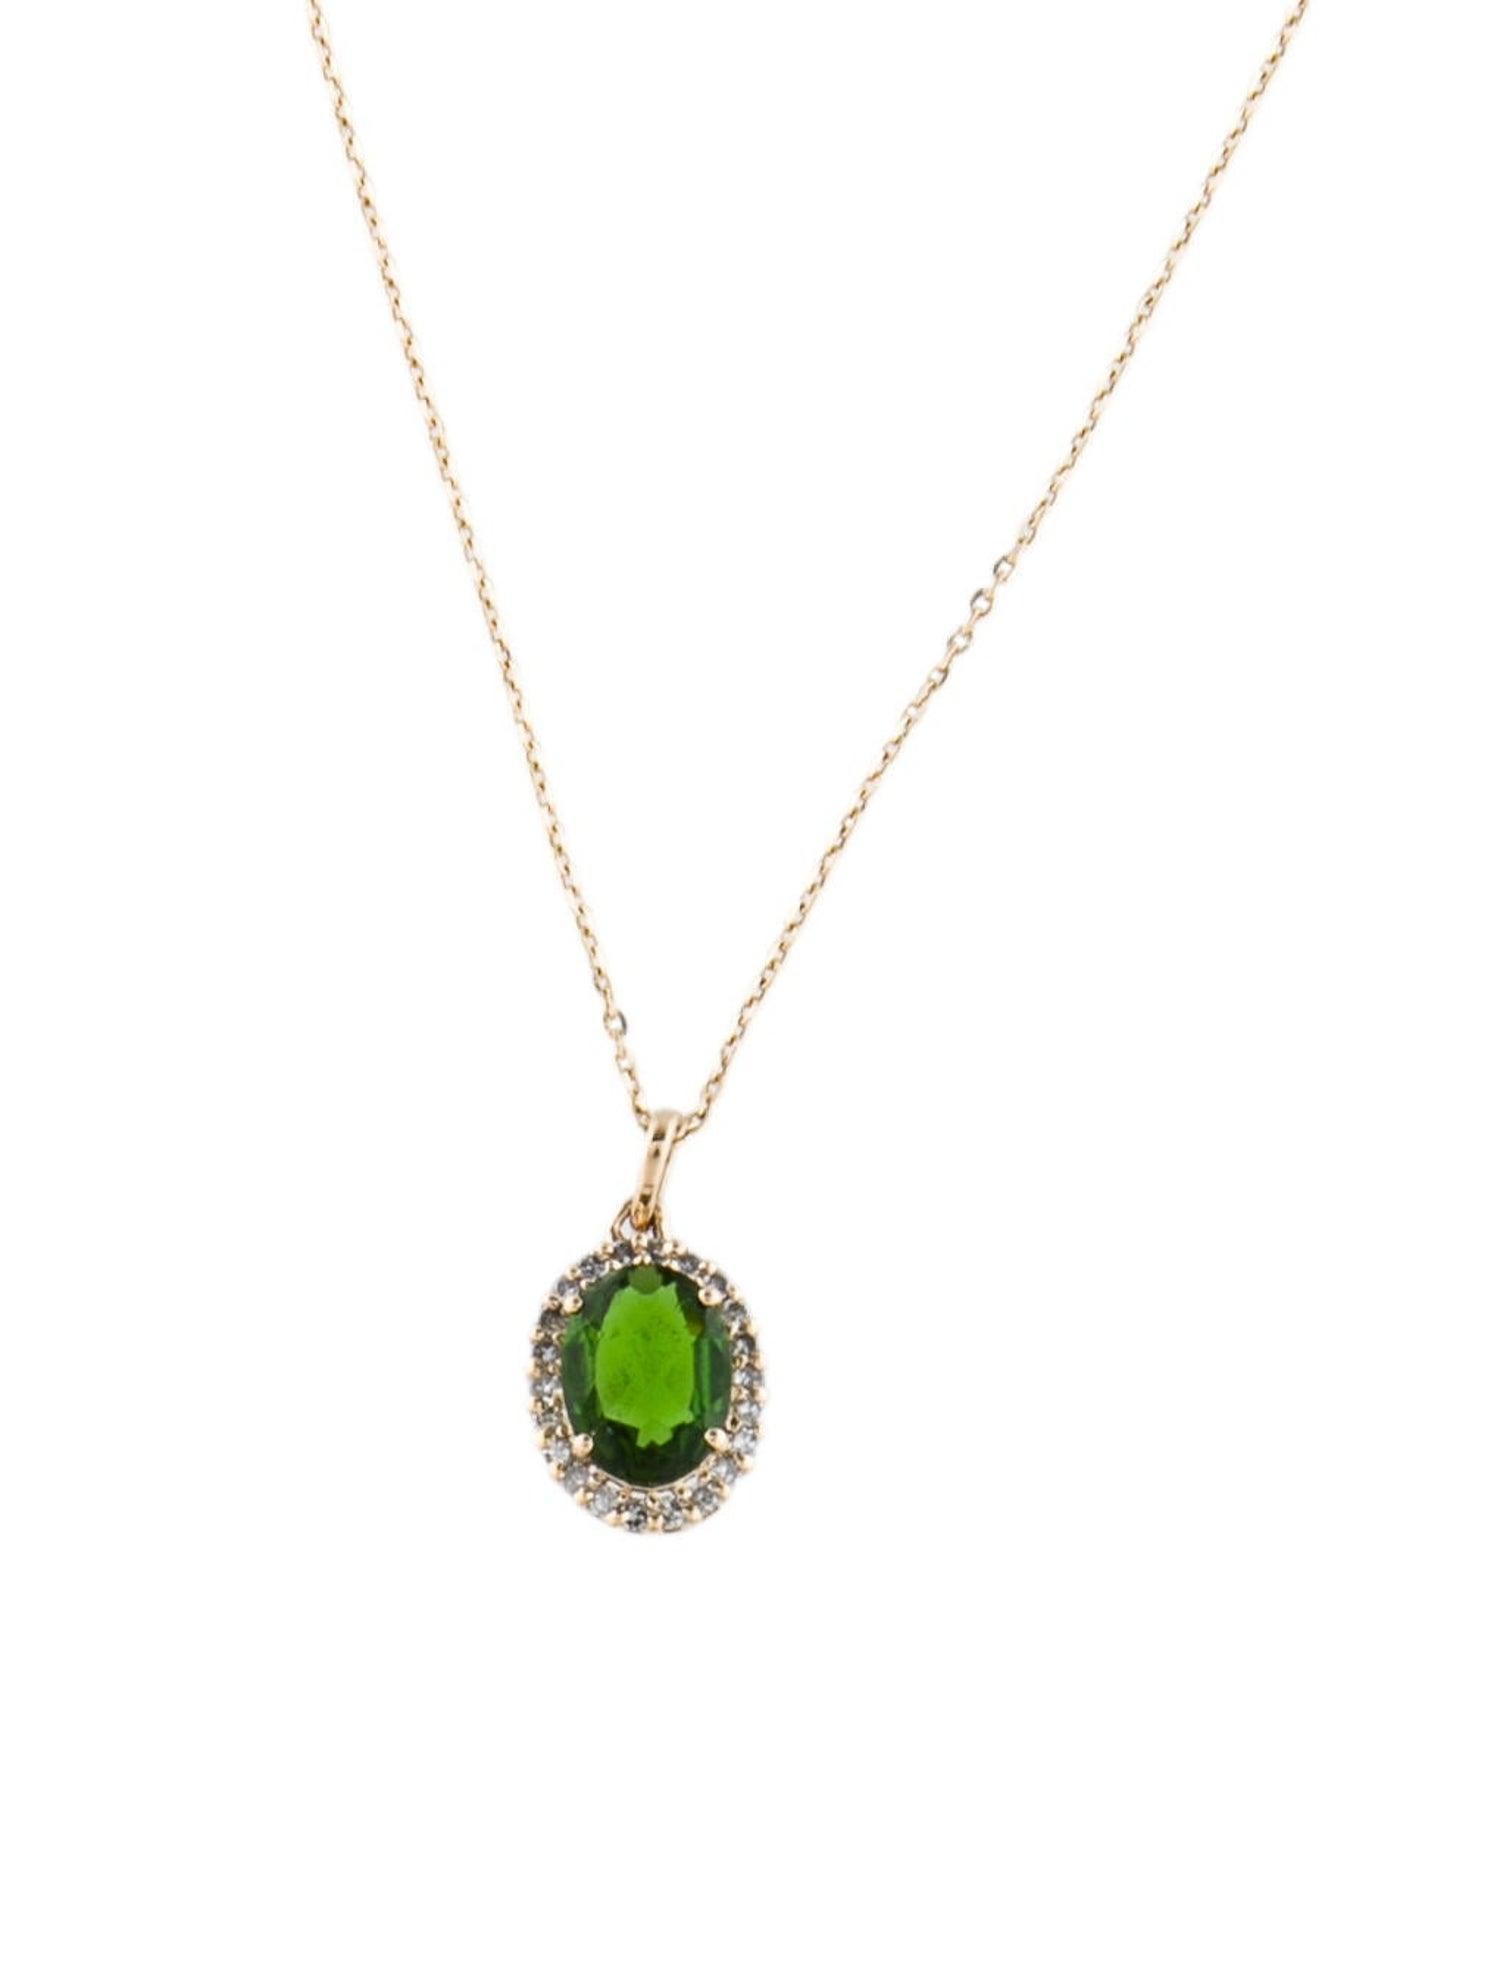 Elevate your style with our Vivid Green Treasure Trove pendant, a radiant masterpiece from the 'Emerald Enigma' collection by Jeweltique. This exquisite piece celebrates the hidden gem of the gemstone world, the mesmerizing Chrome Diopside. Its deep